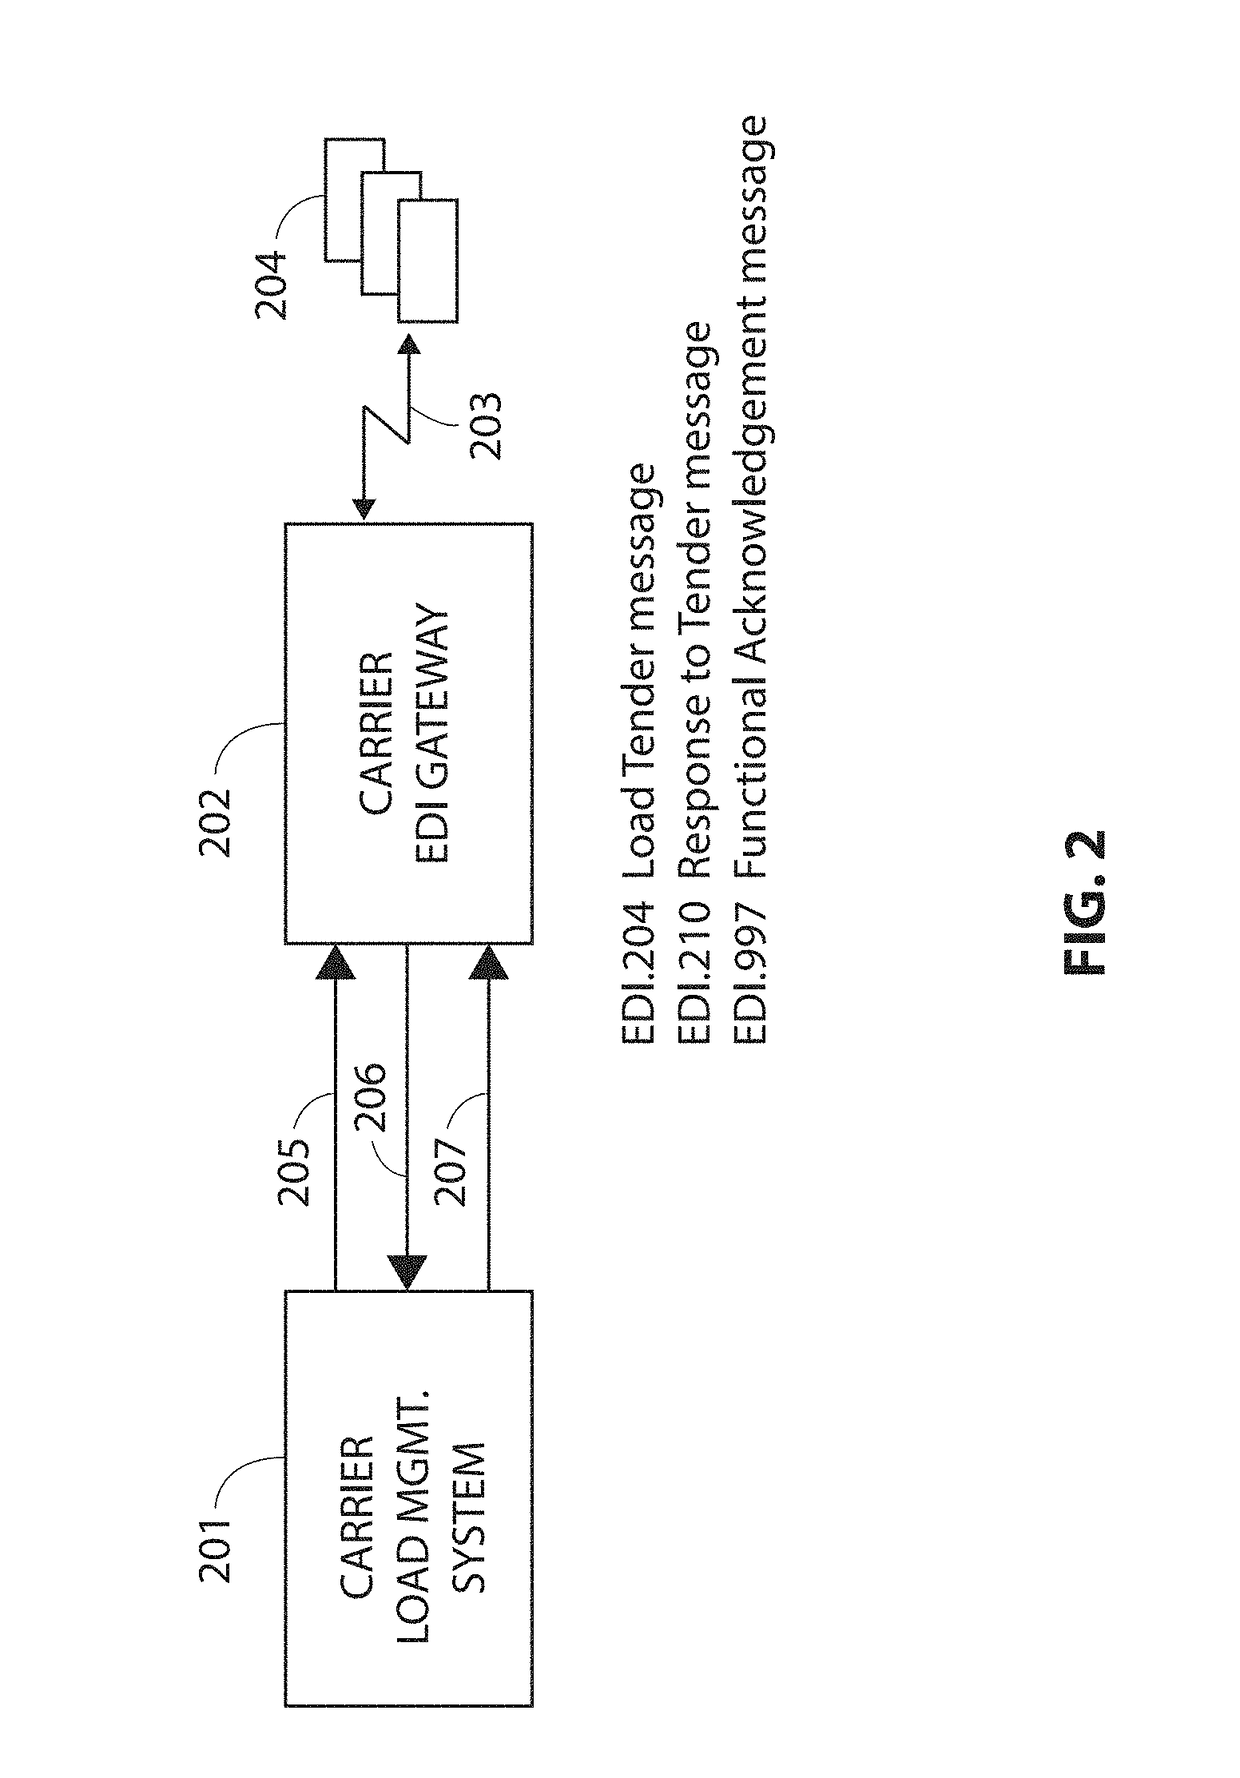 Methods of optimizing carrier loads transported across a transportation network by transport carriers